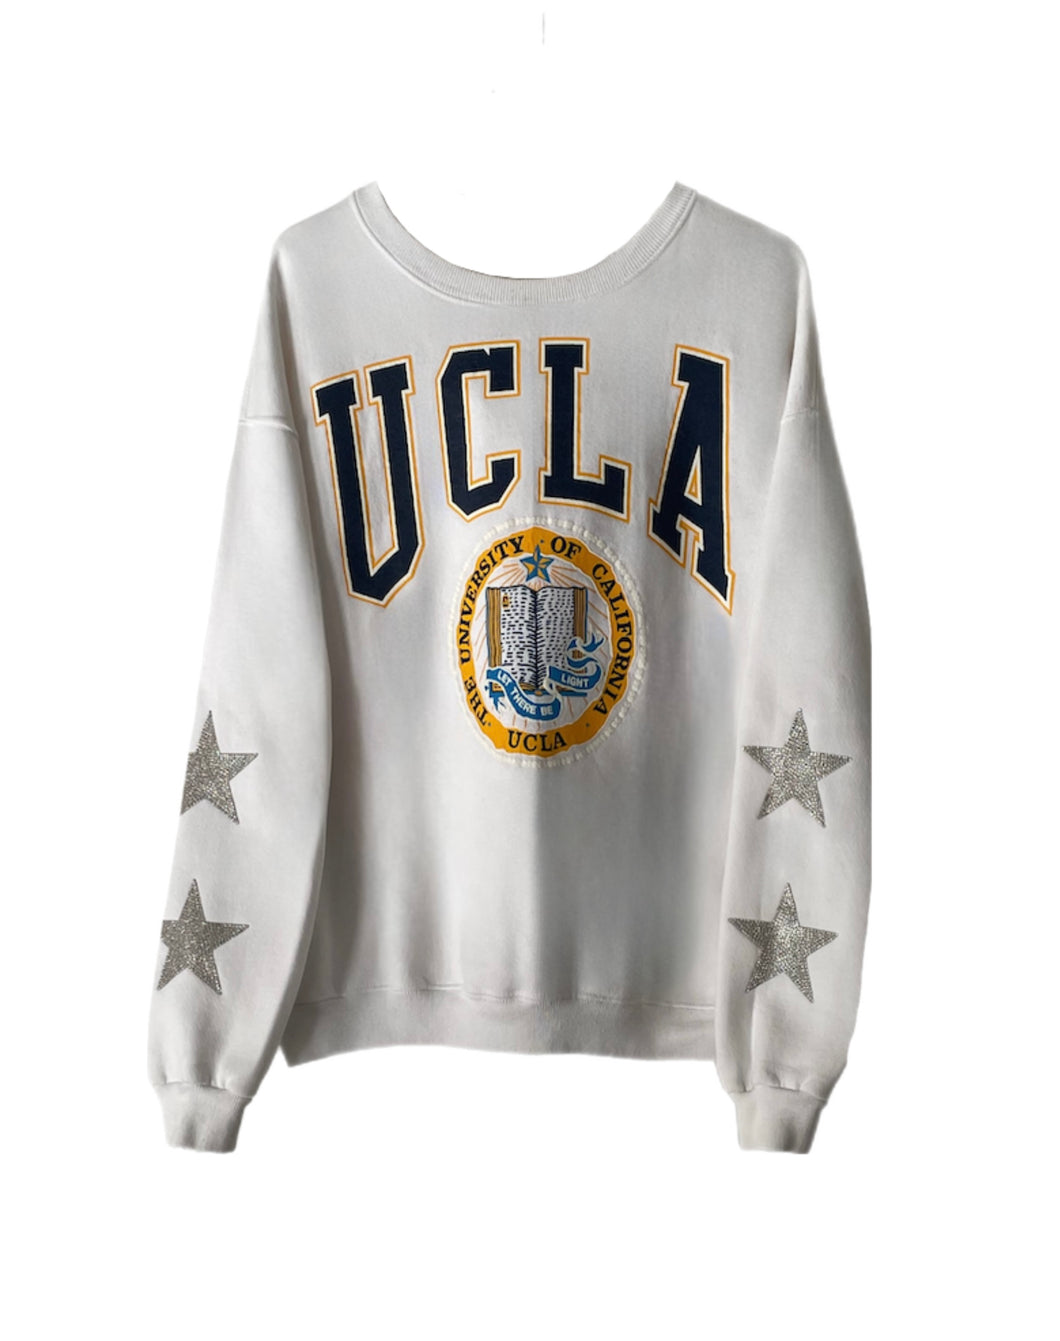 University of California Los Angeles, One of a KIND Vintage UCLA Bruins Sweatshirt with Crystals Star Design